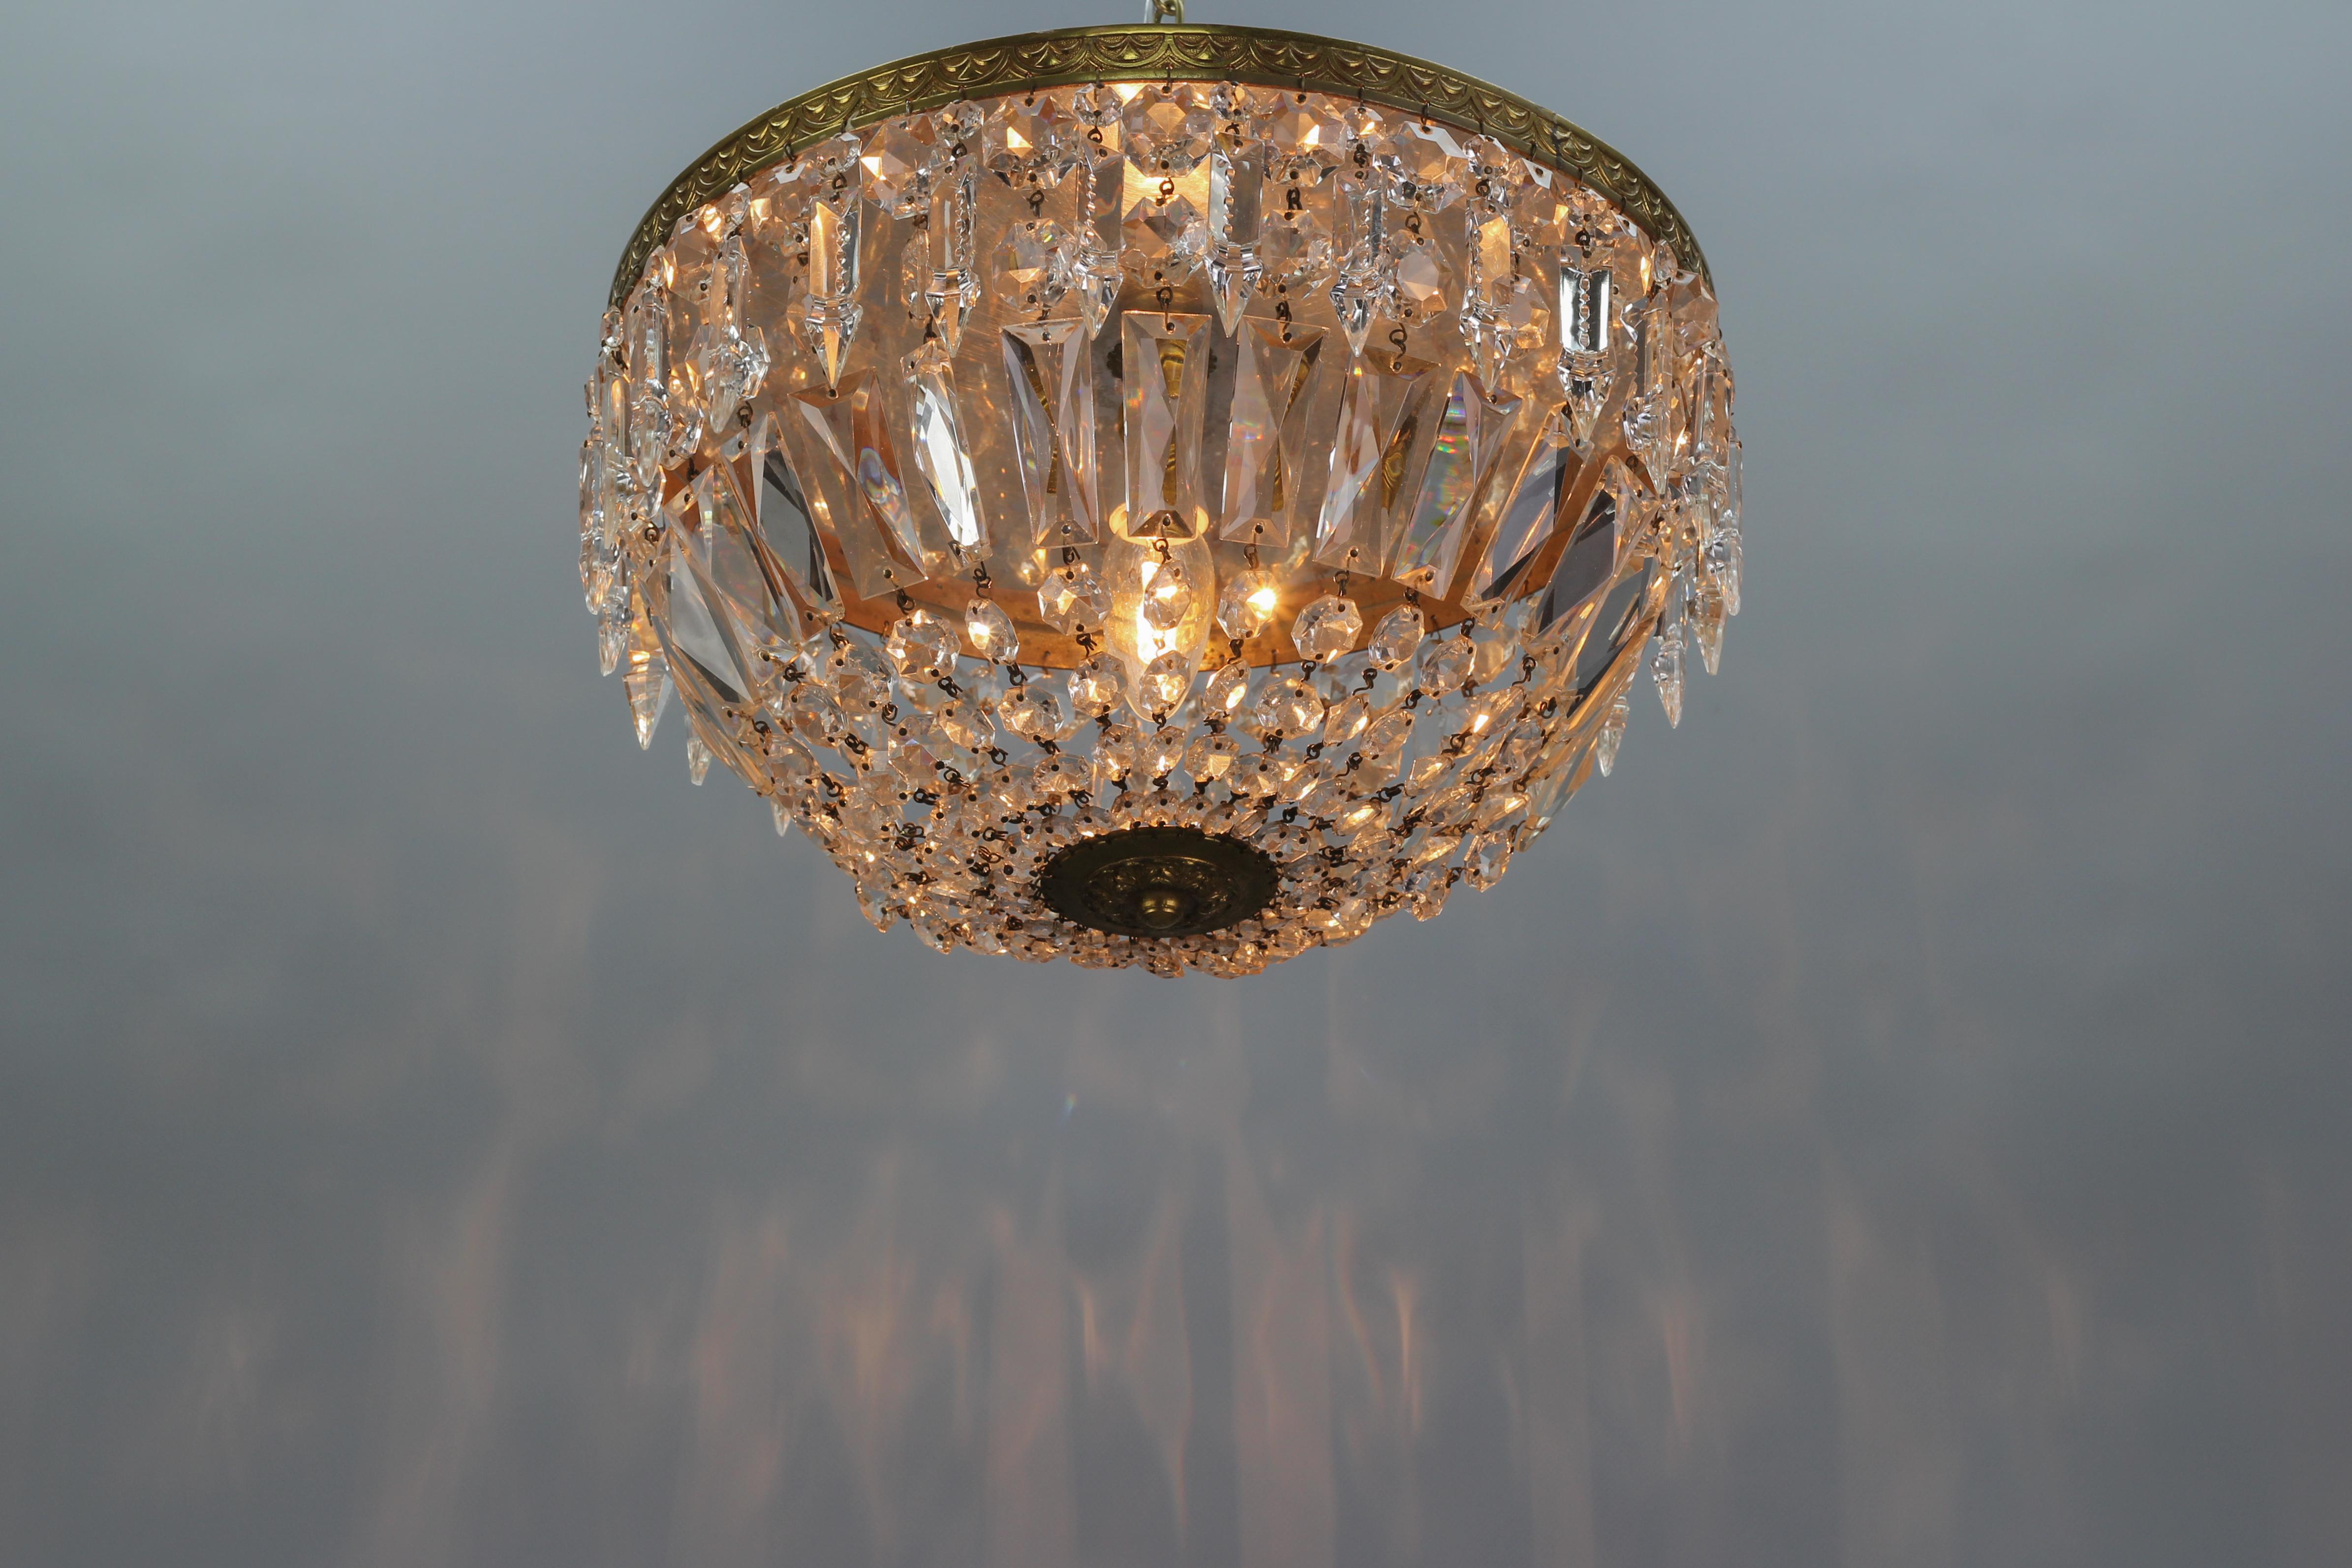 French Art Deco Style Crystal Glass and Brass Basket Ceiling Light Fixture 11